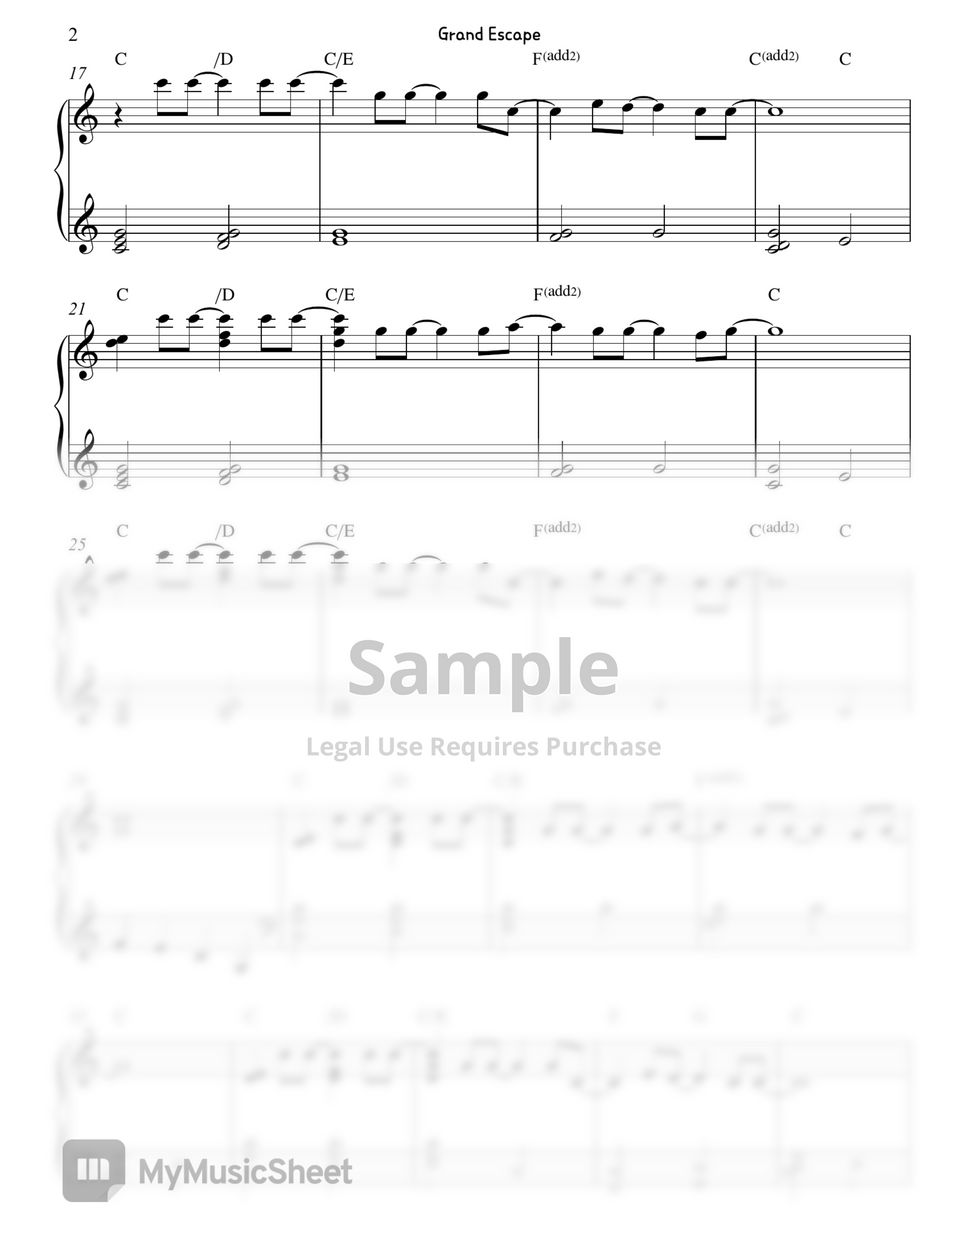 Weathering With You (날씨의 아이) OST - Grand Escape (グランドエスケープ) Easy Piano Sheet (Easy Transposition key) by. Gloria L.